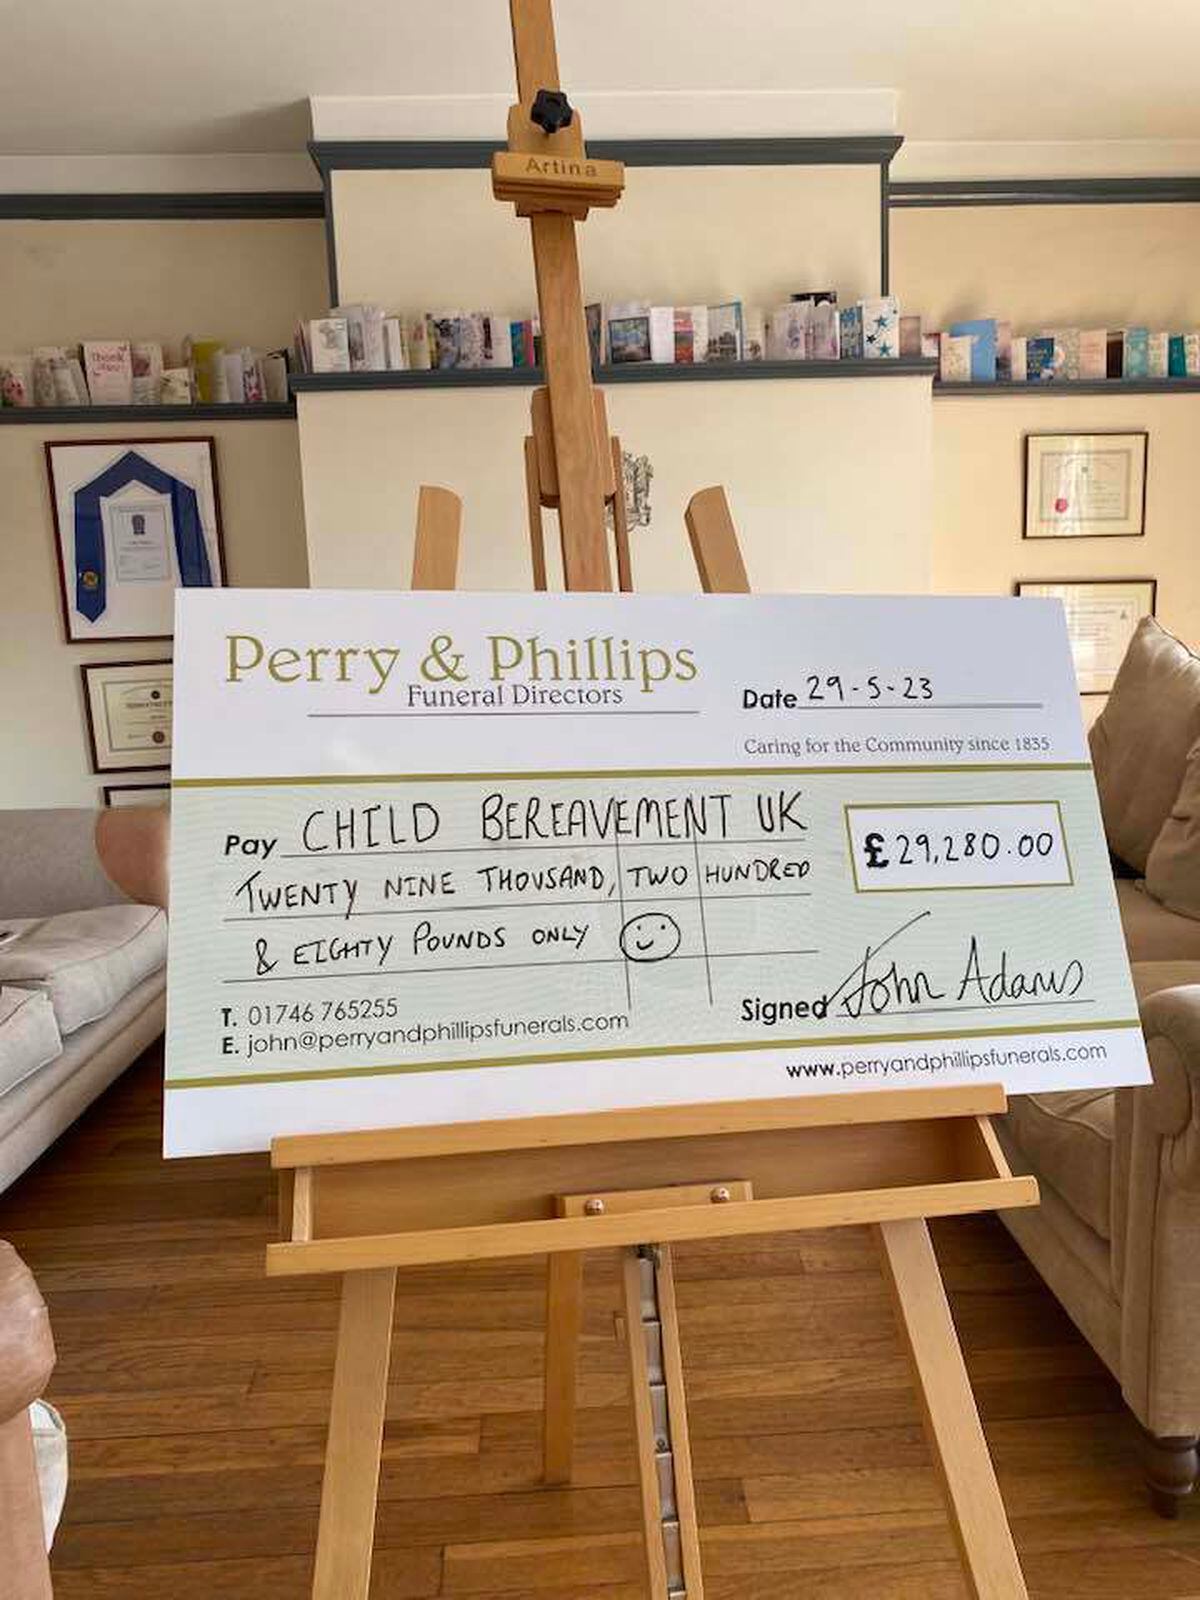 Mr Adams is set to present the cheque to Child Bereavement UK